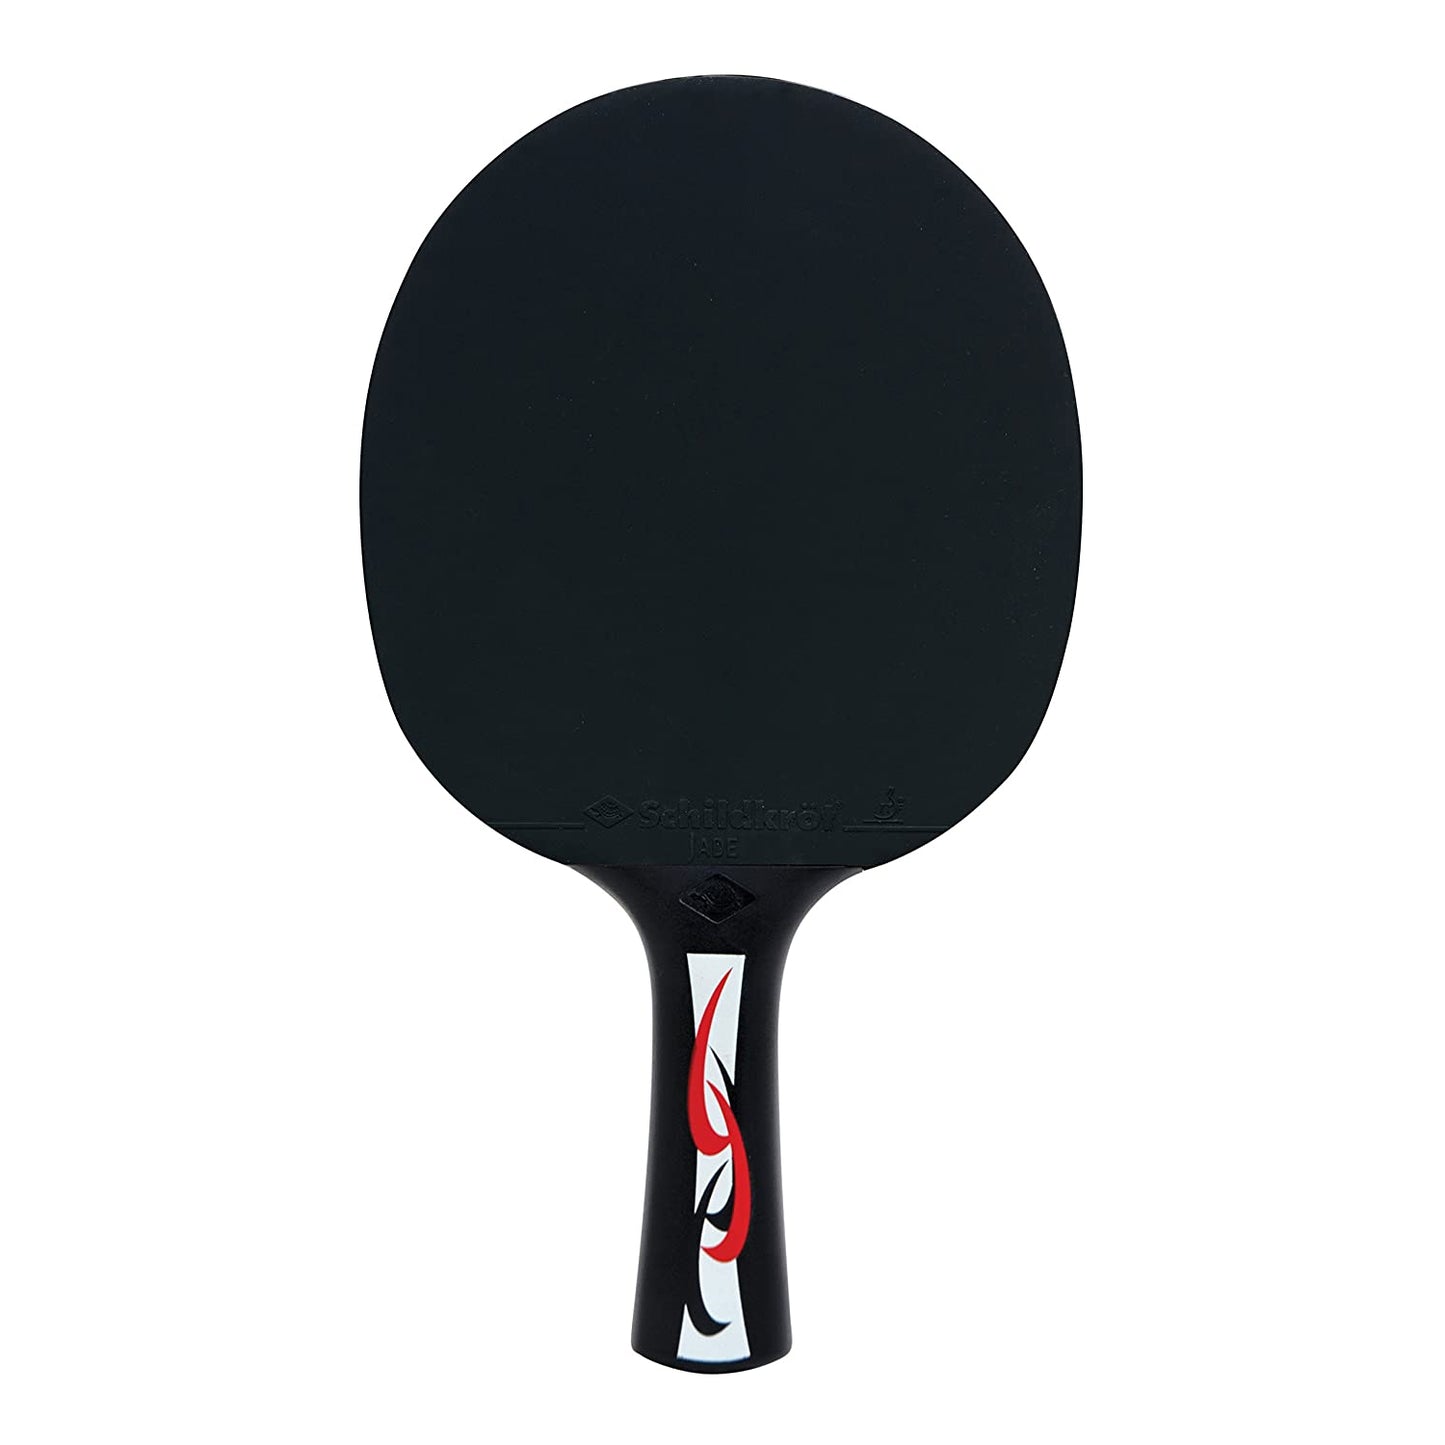 Donic Young Champ 400 Table Tennis Bat - Best Price online Prokicksports.com